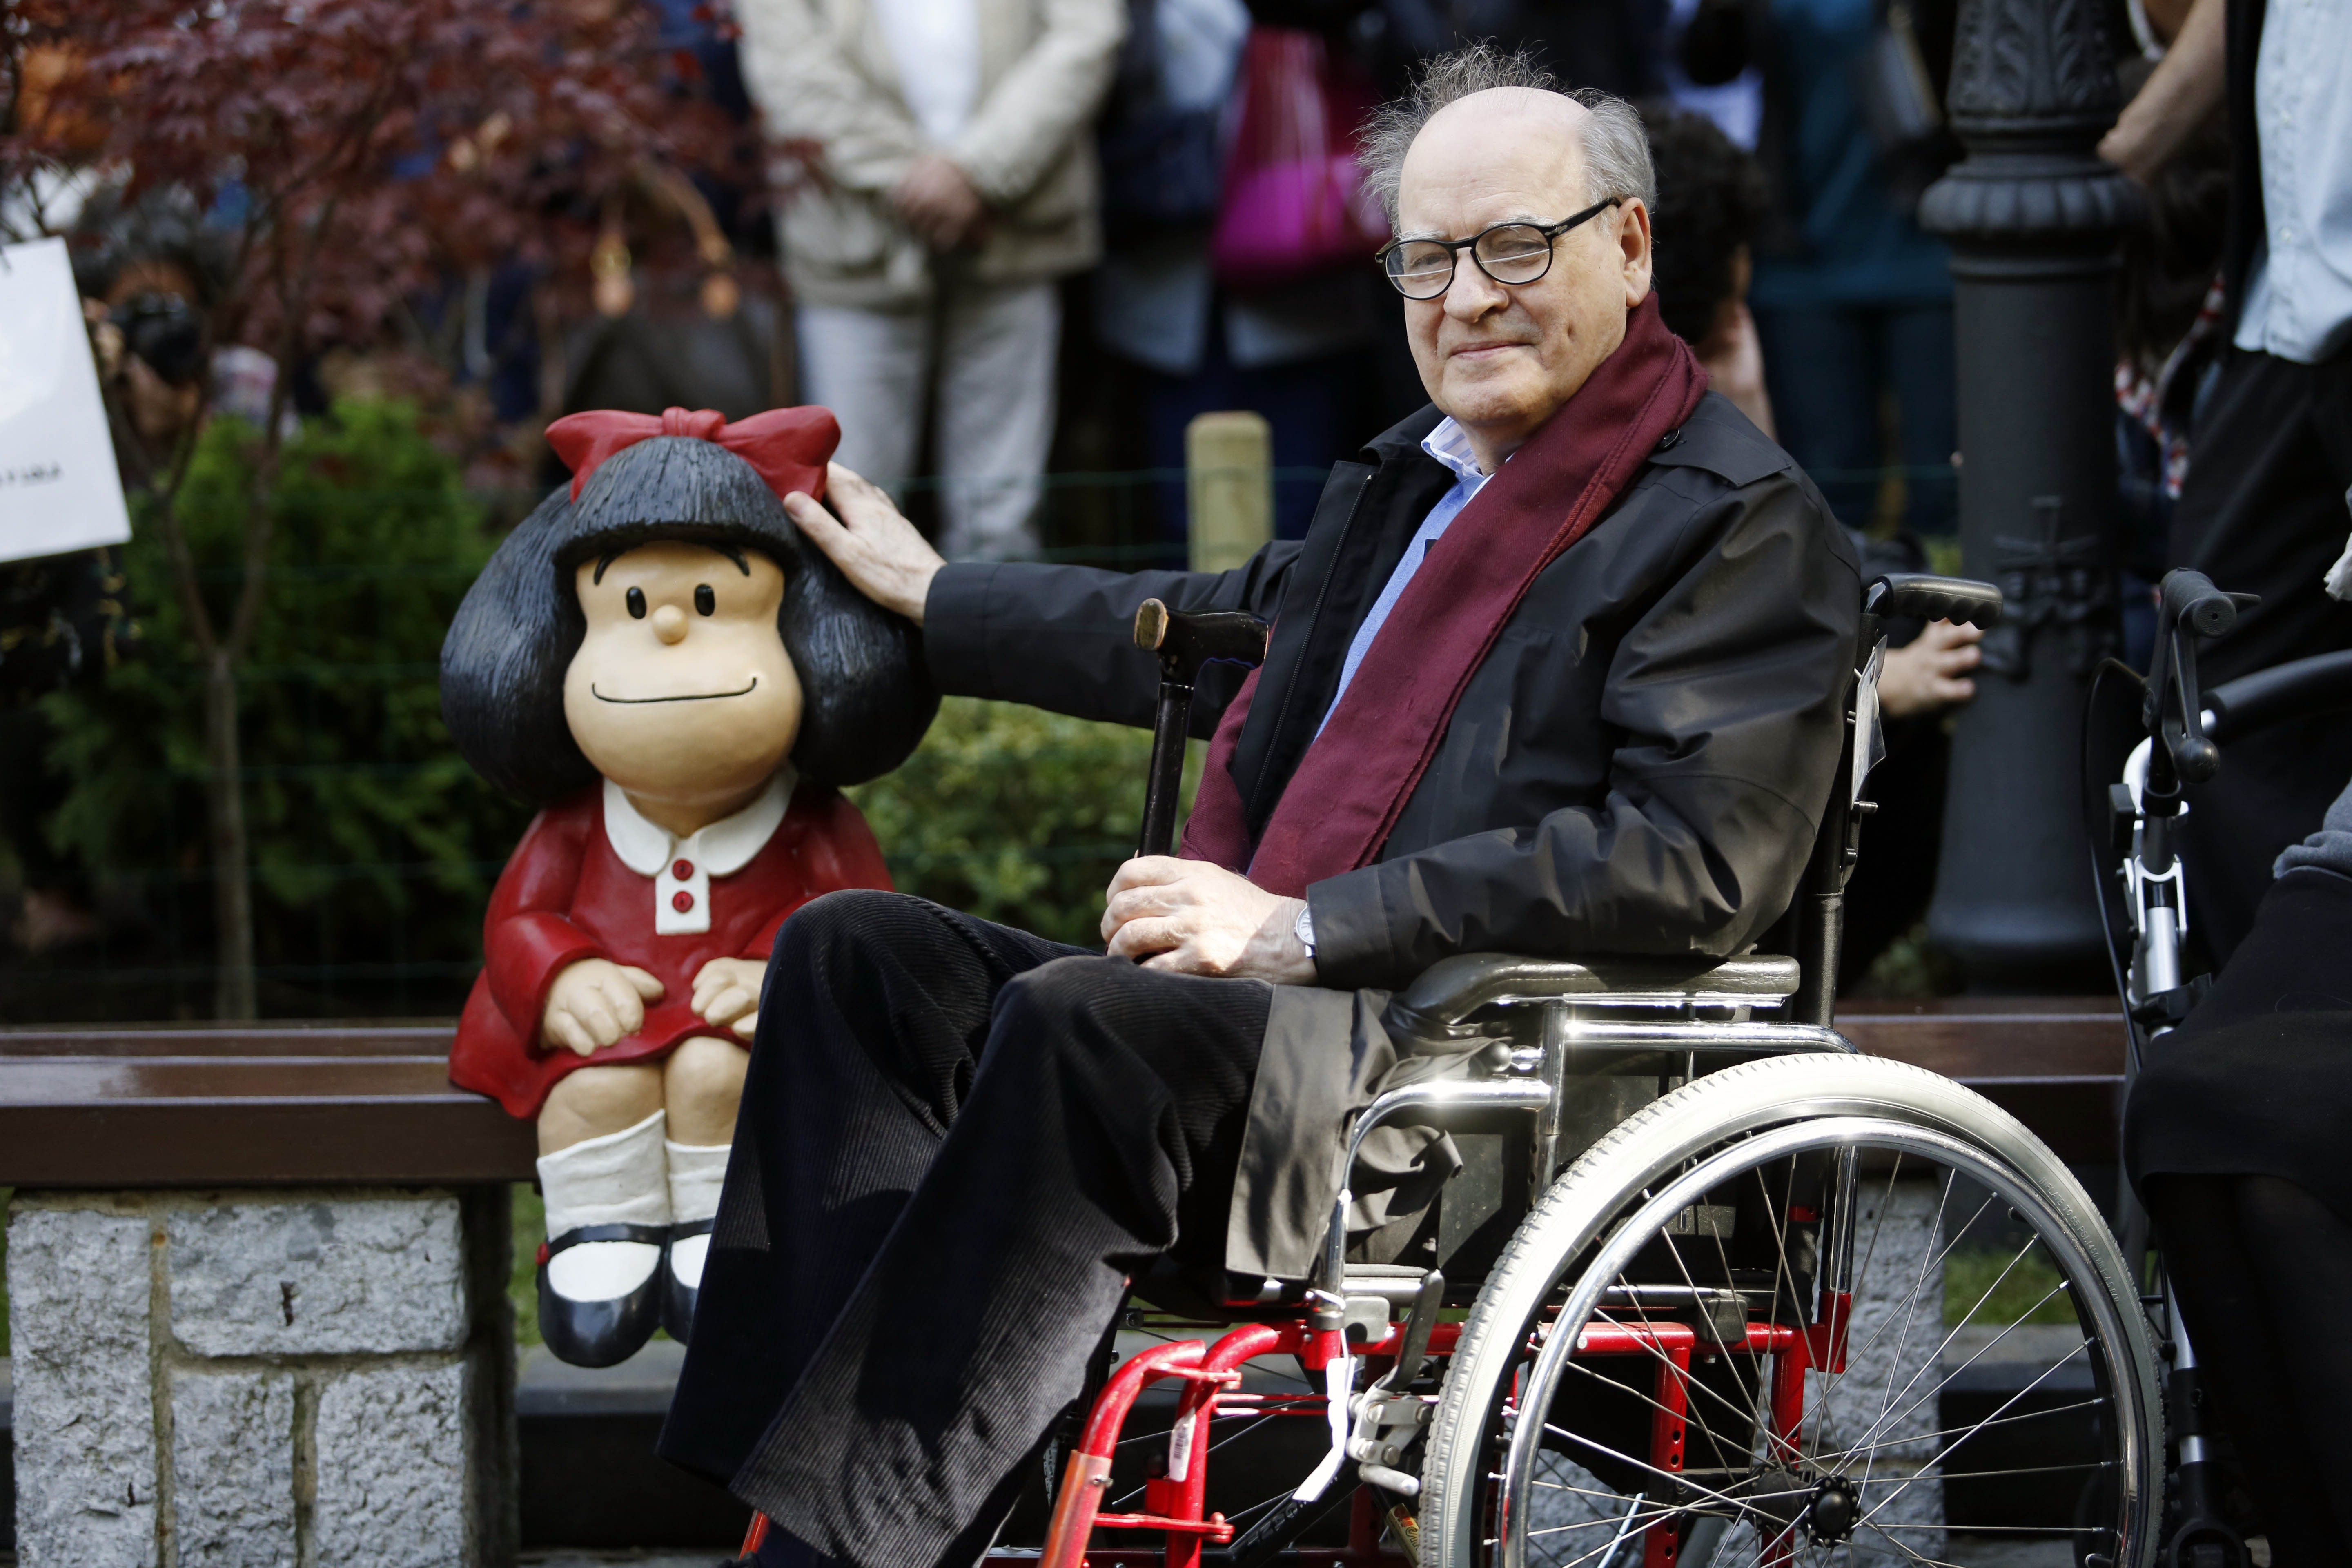 OVIEDO, SPAIN - OCTOBER 23: Cartoonist Joaquin Salvador Lavado, aka Quino, poses beside a sculpture of his creature Mafalda at the San Francisco park. Quino will be awarded the 2014 Prince of Asturias Award for Communication and Humanities on October 23,  (Foto: Europa Press via Getty Images)